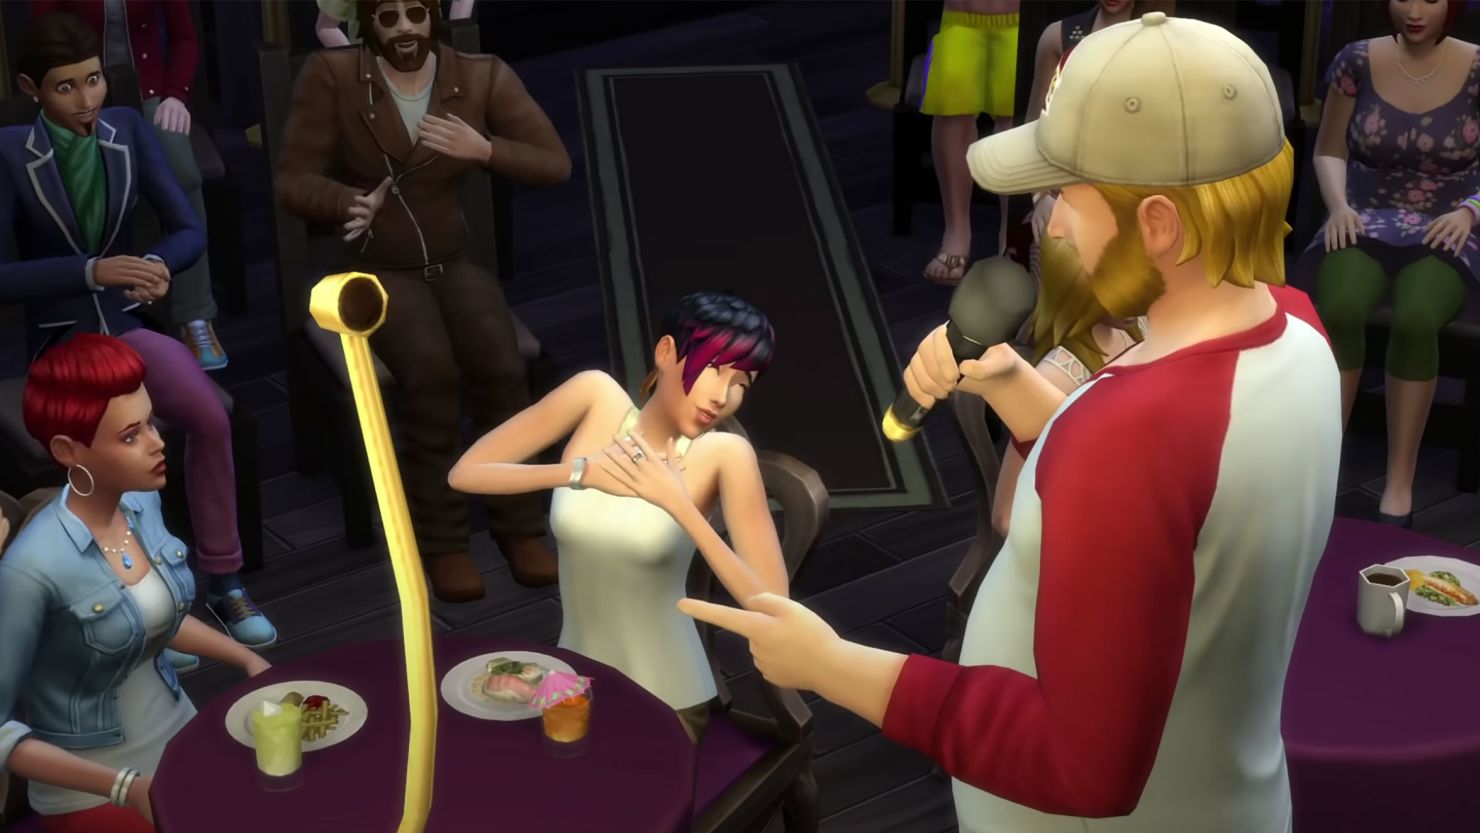 The Sims 5 is free-to-play with in-game marketplace for user content